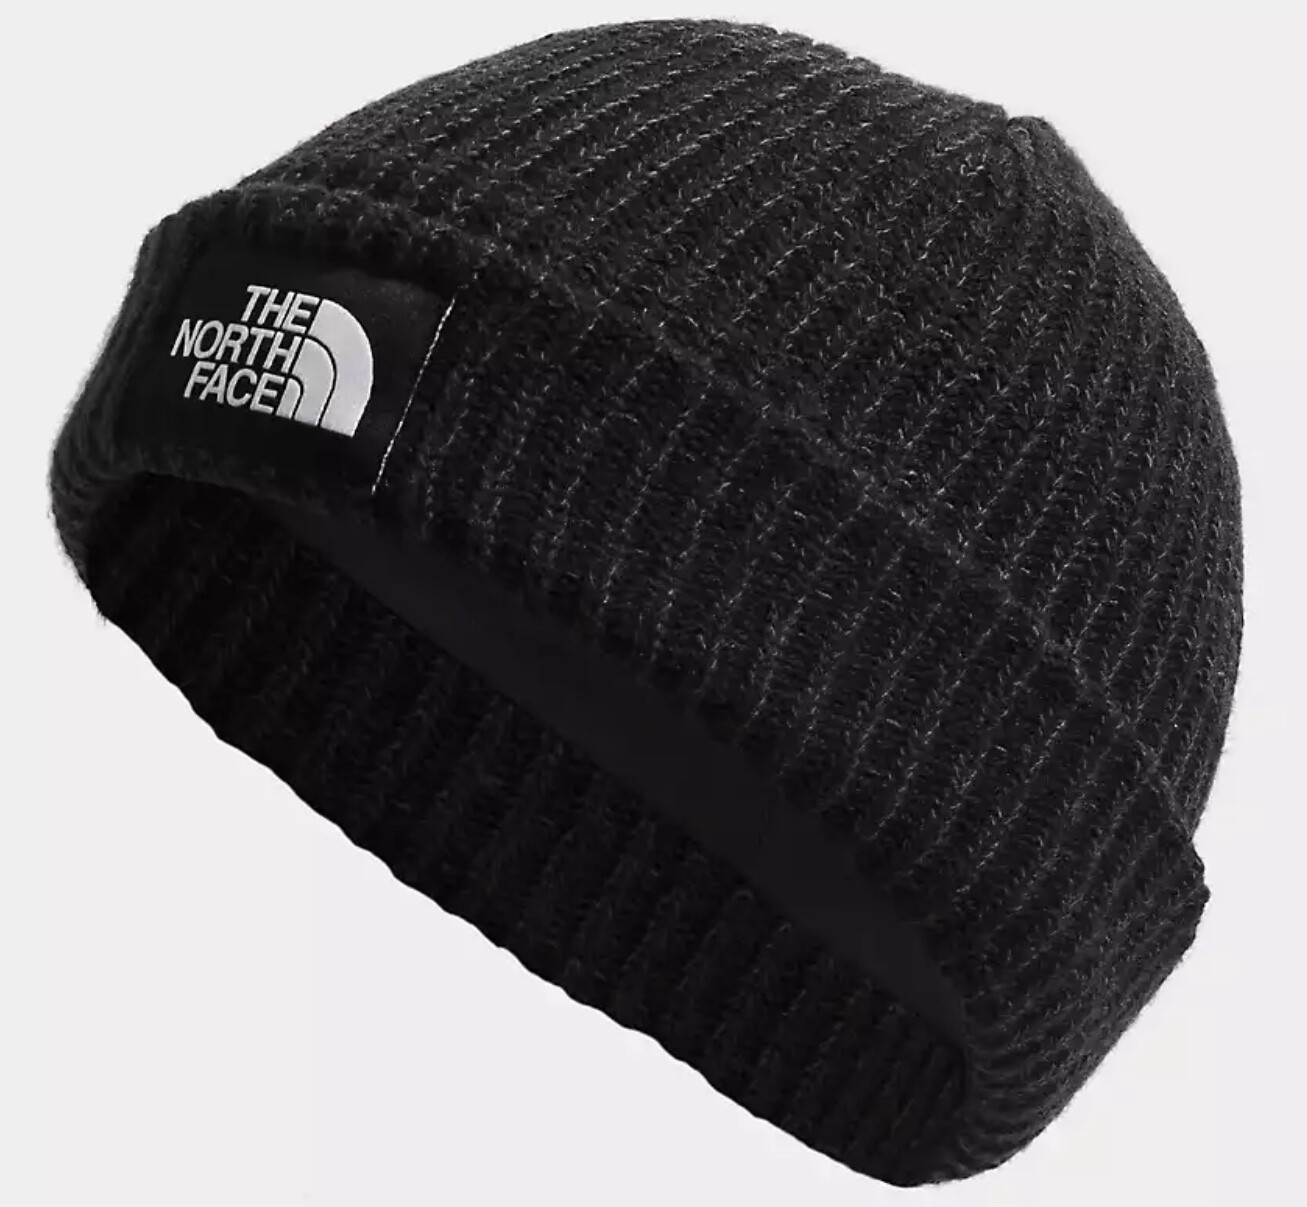 The North Face Salty Dog Beanie BLACK